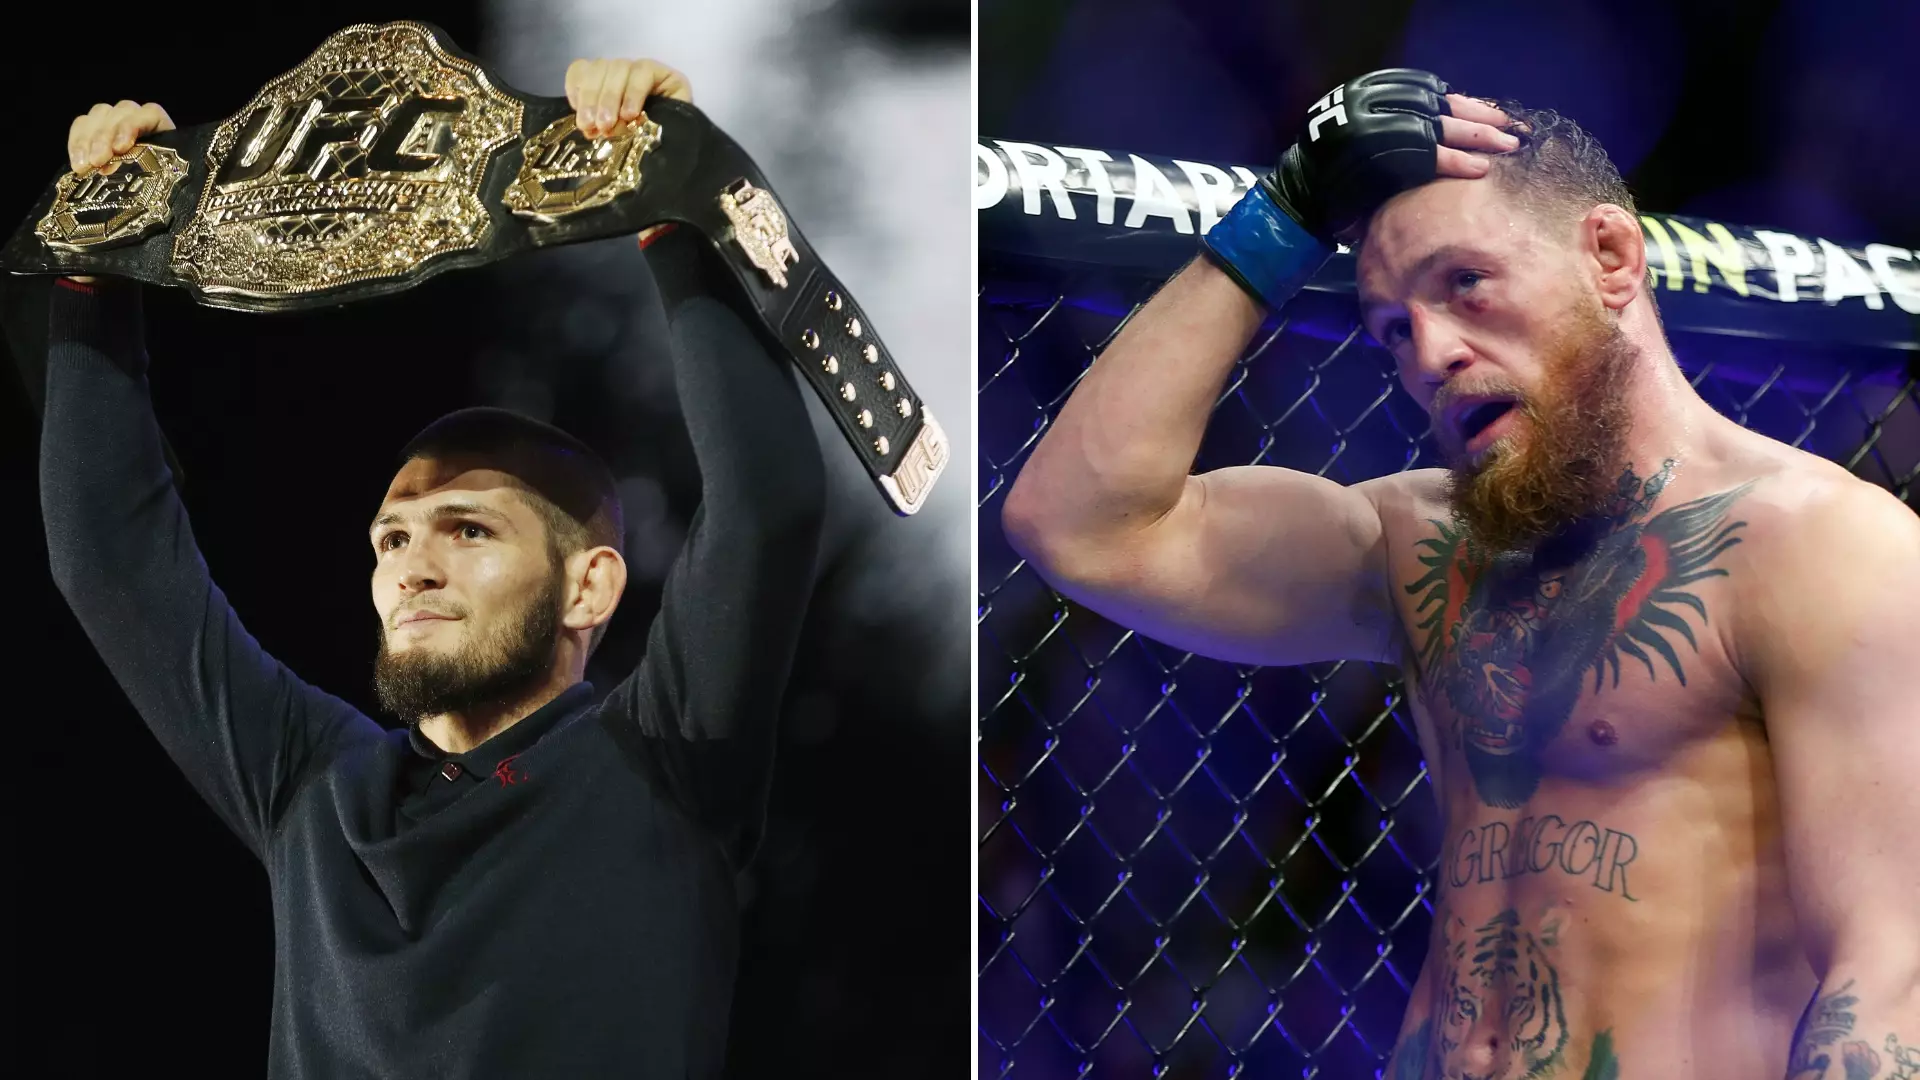 ‘Wobbling’ Dillon Danis Escorted Out Of Building After Khabib Nurmagomedov Attack